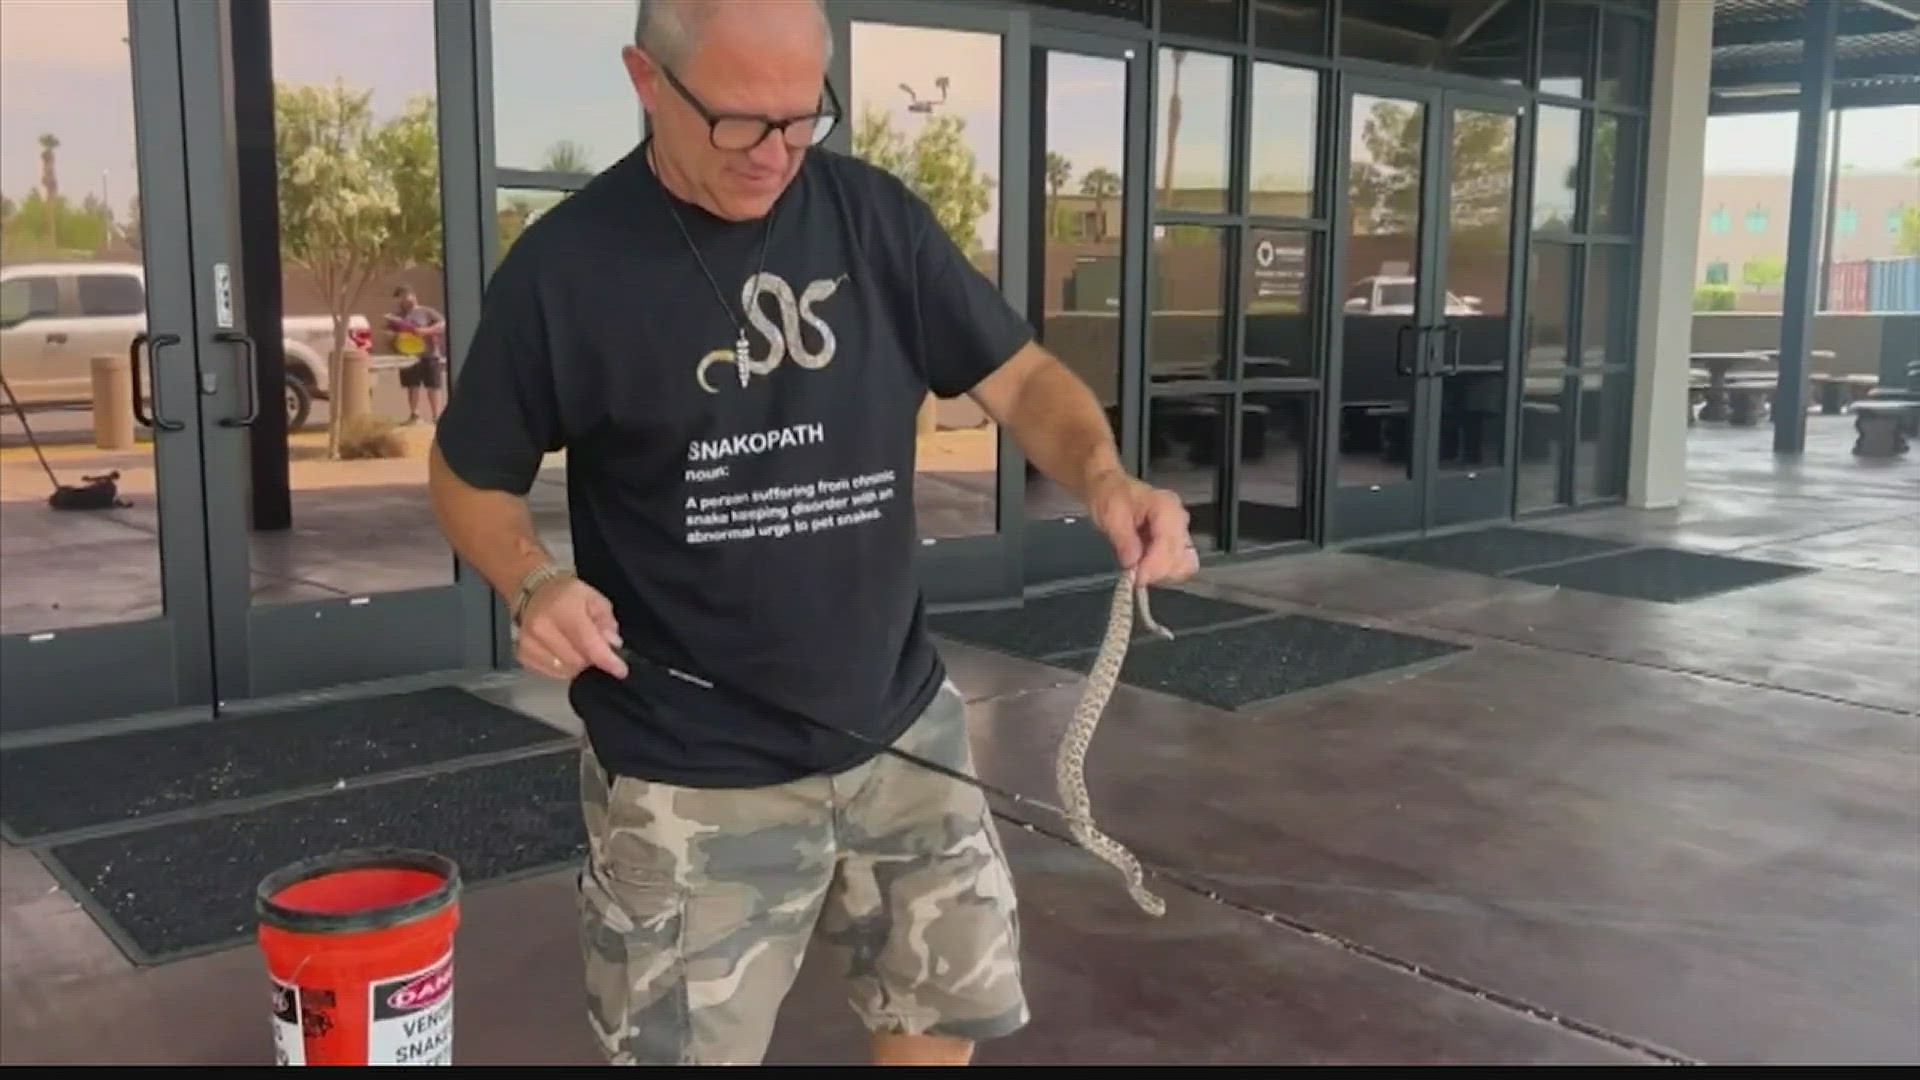 Tim Angello of Nevada preaches the gospel, but in his spare time he helps relocate snakes that get a little too close for others' comfort.